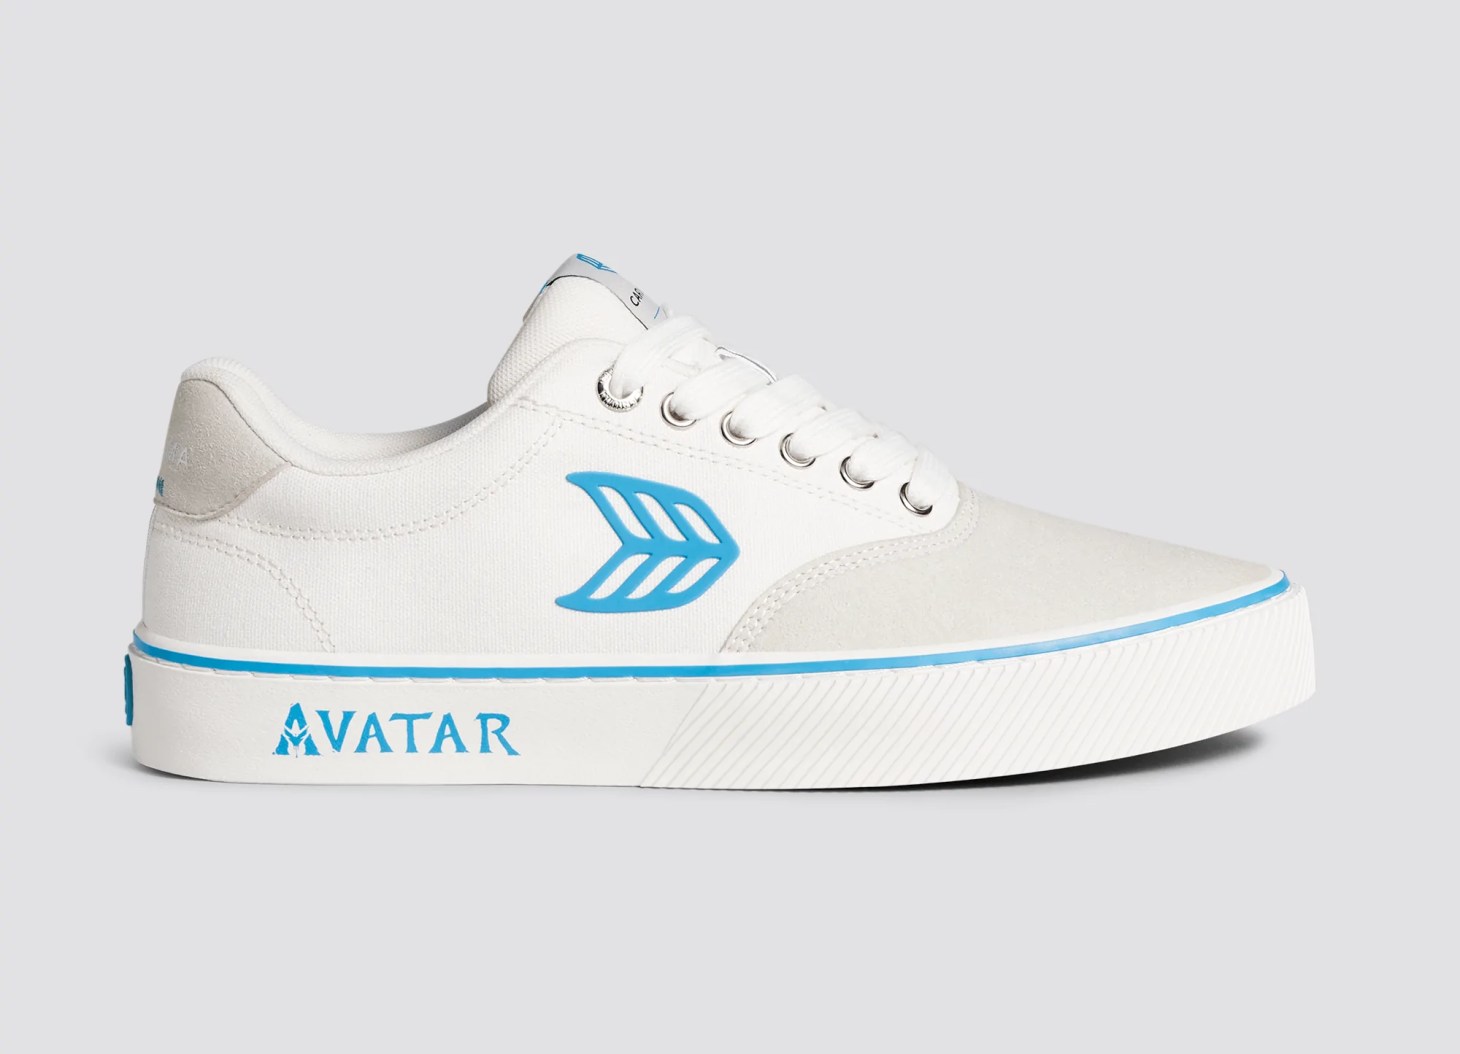 avatar naioca pro sneaker from the cariuma spring collection